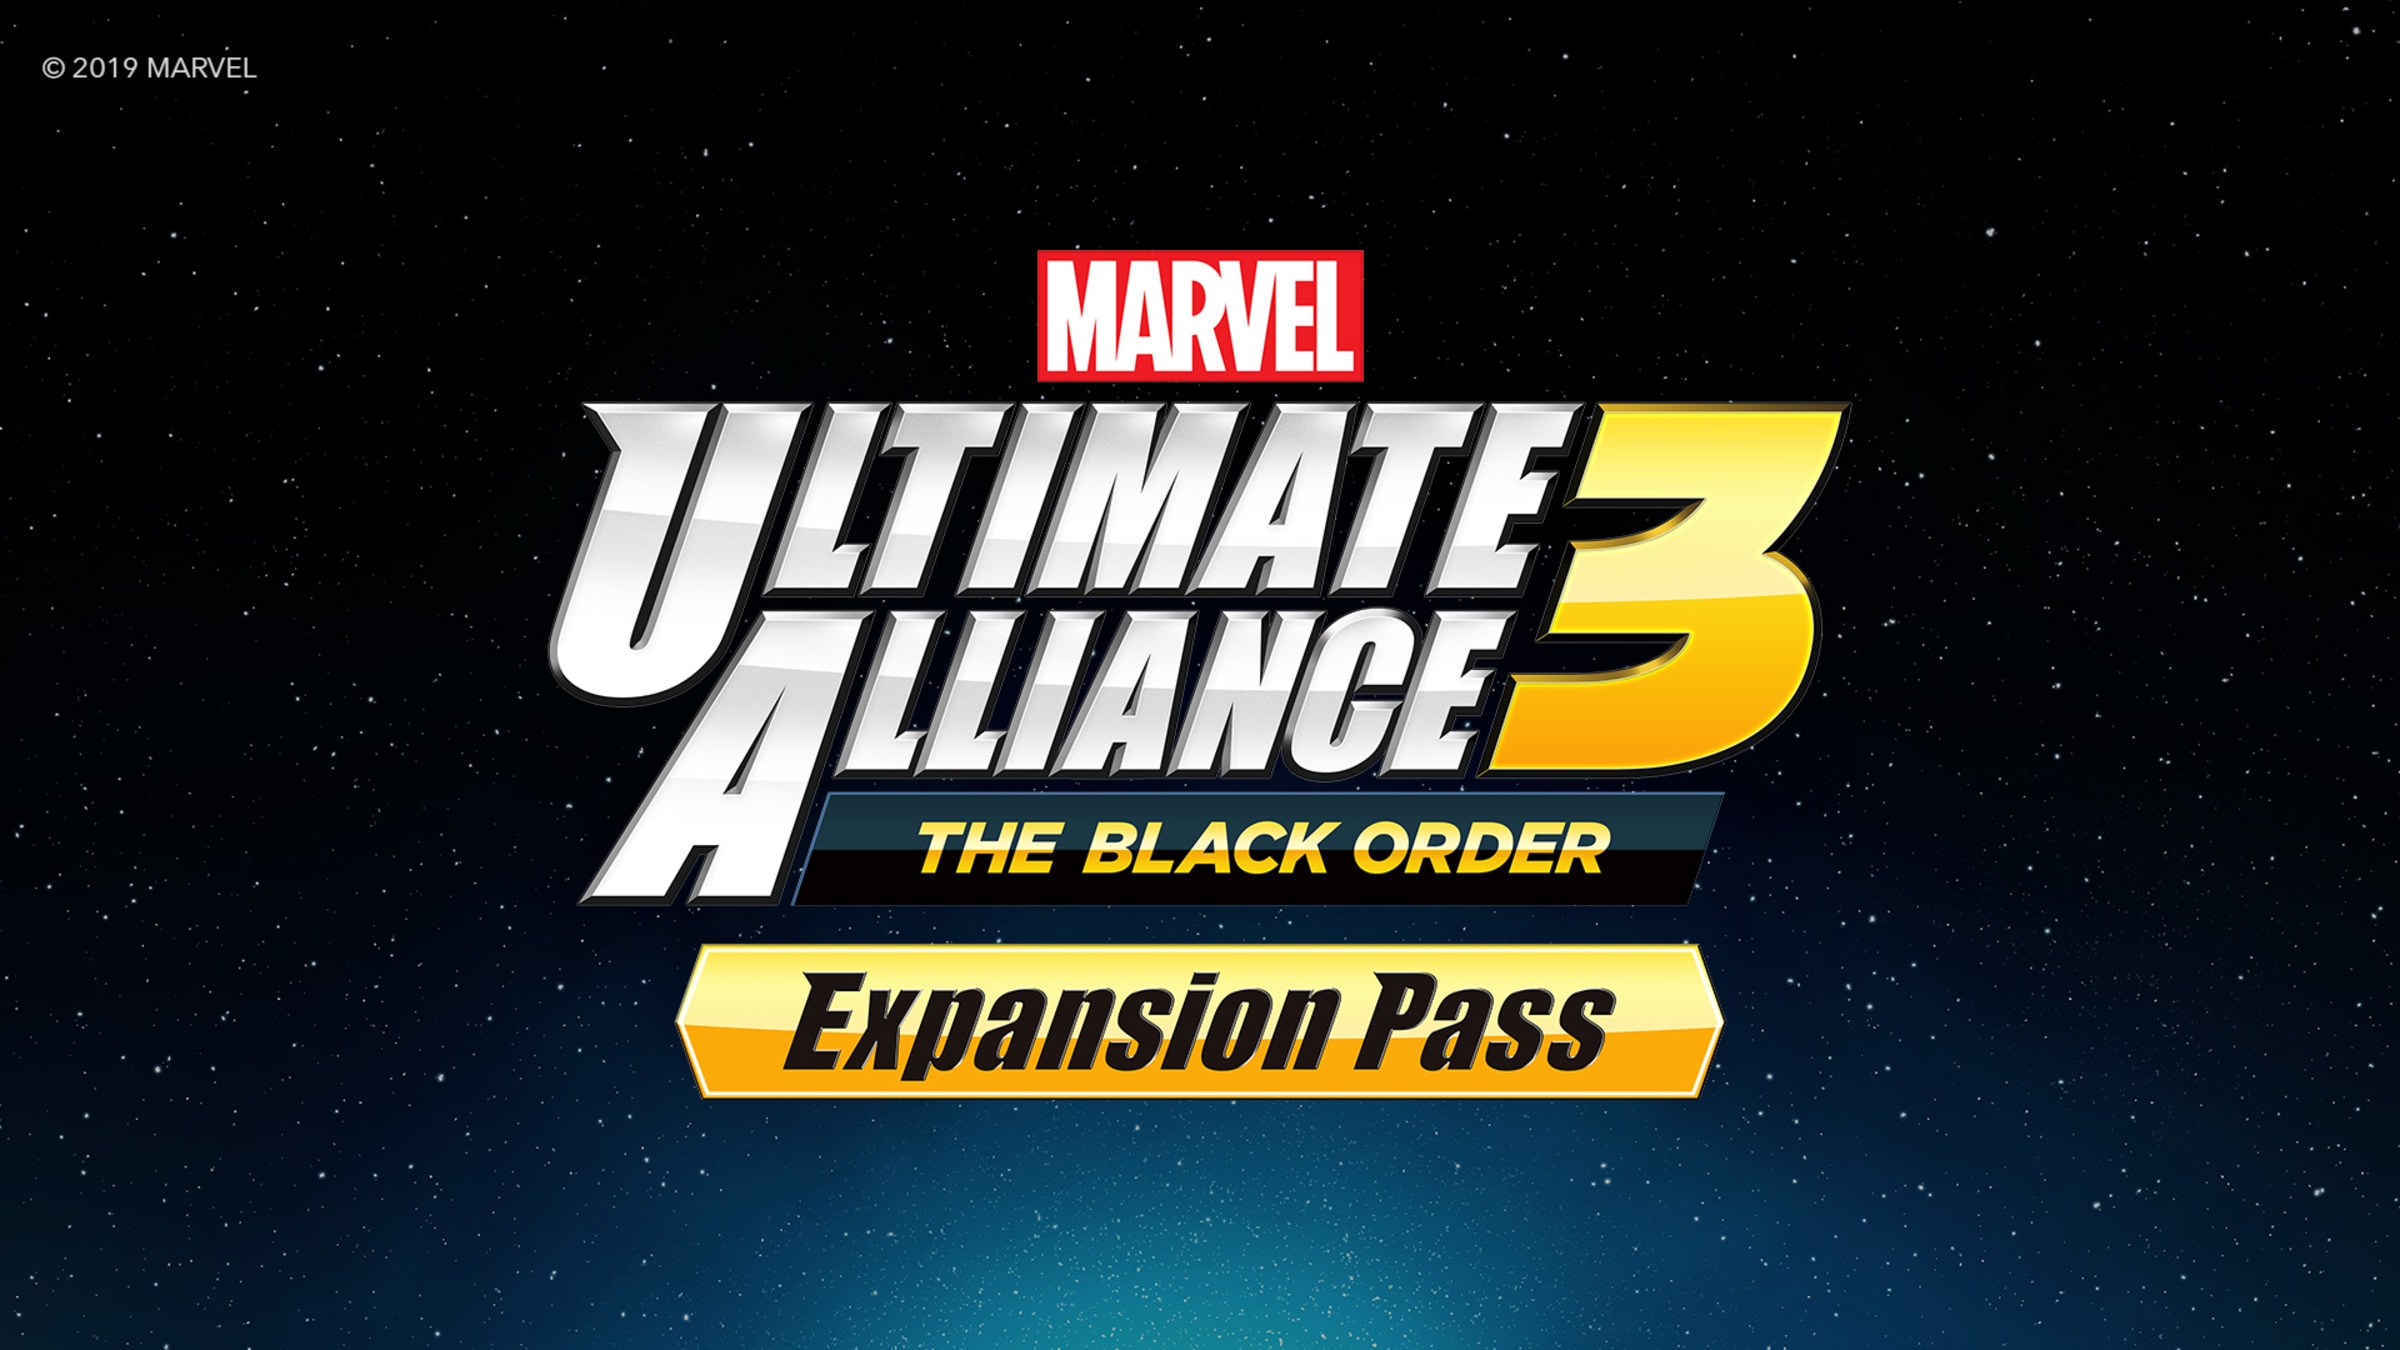 Site　Nintendo　for　ALLIANCE　Order　Black　3:　Switch　Nintendo　The　Official　Expansion　Pass　MARVEL　ULTIMATE